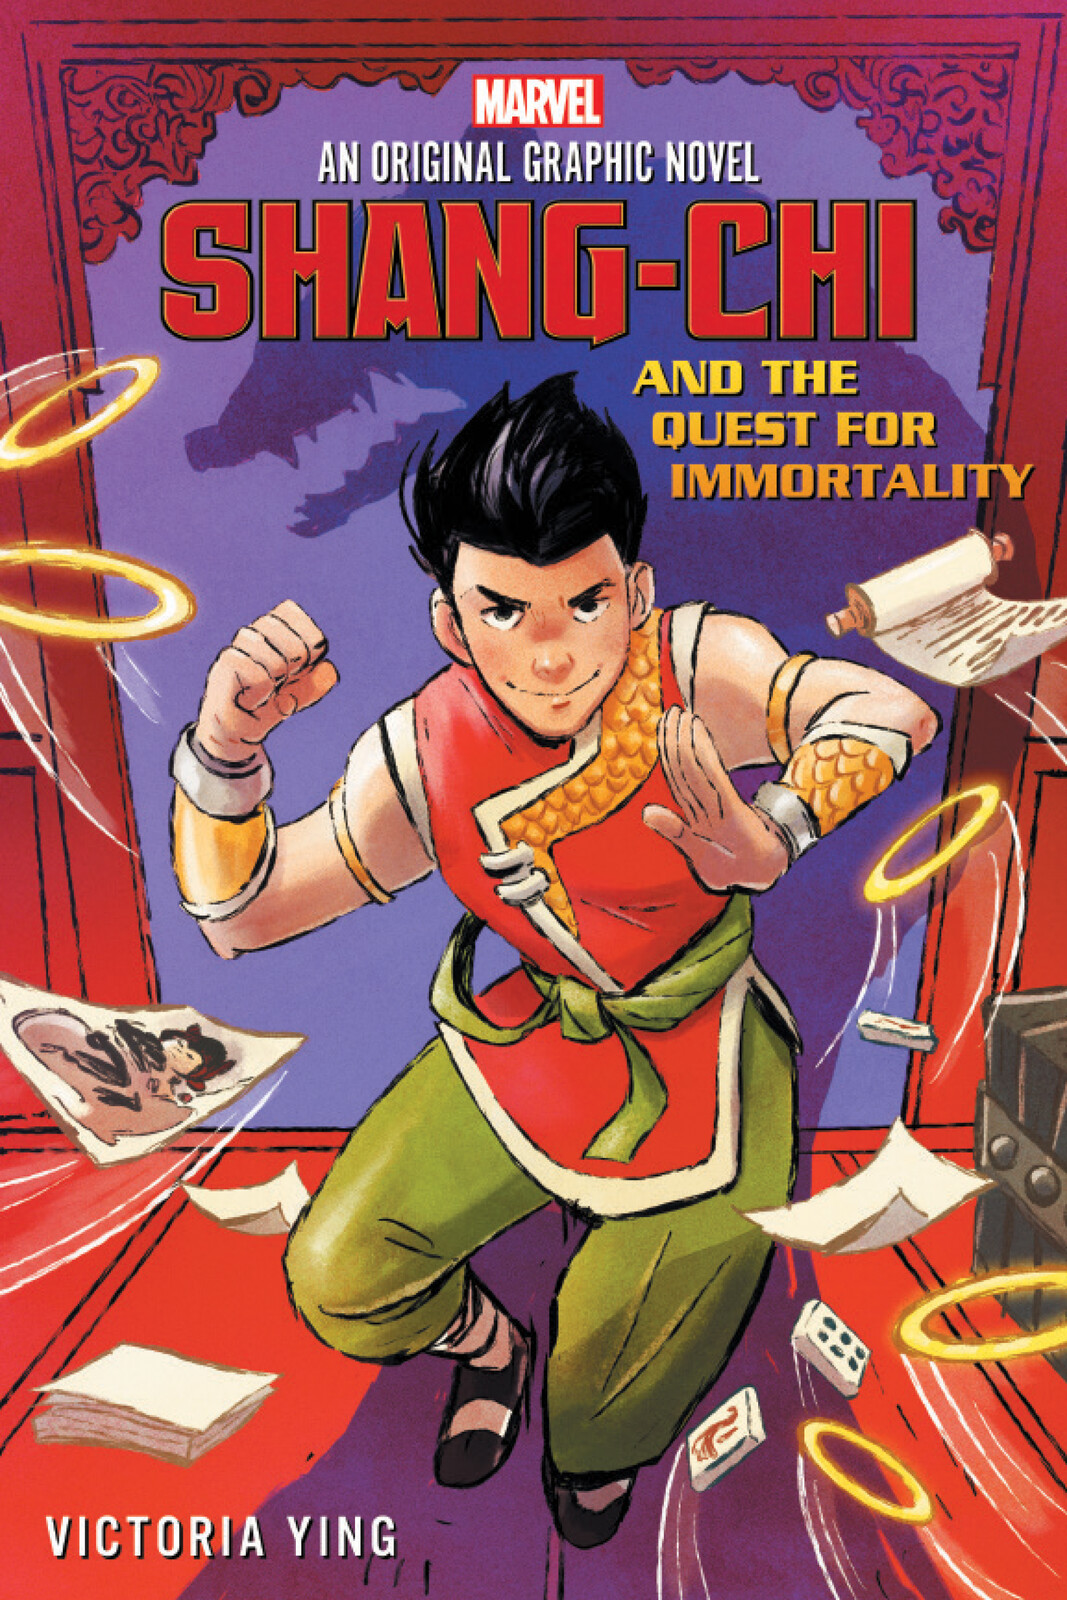 Shang-Chi and the Quest for Immortality Front Cover
Published by Scholastic Inc. 